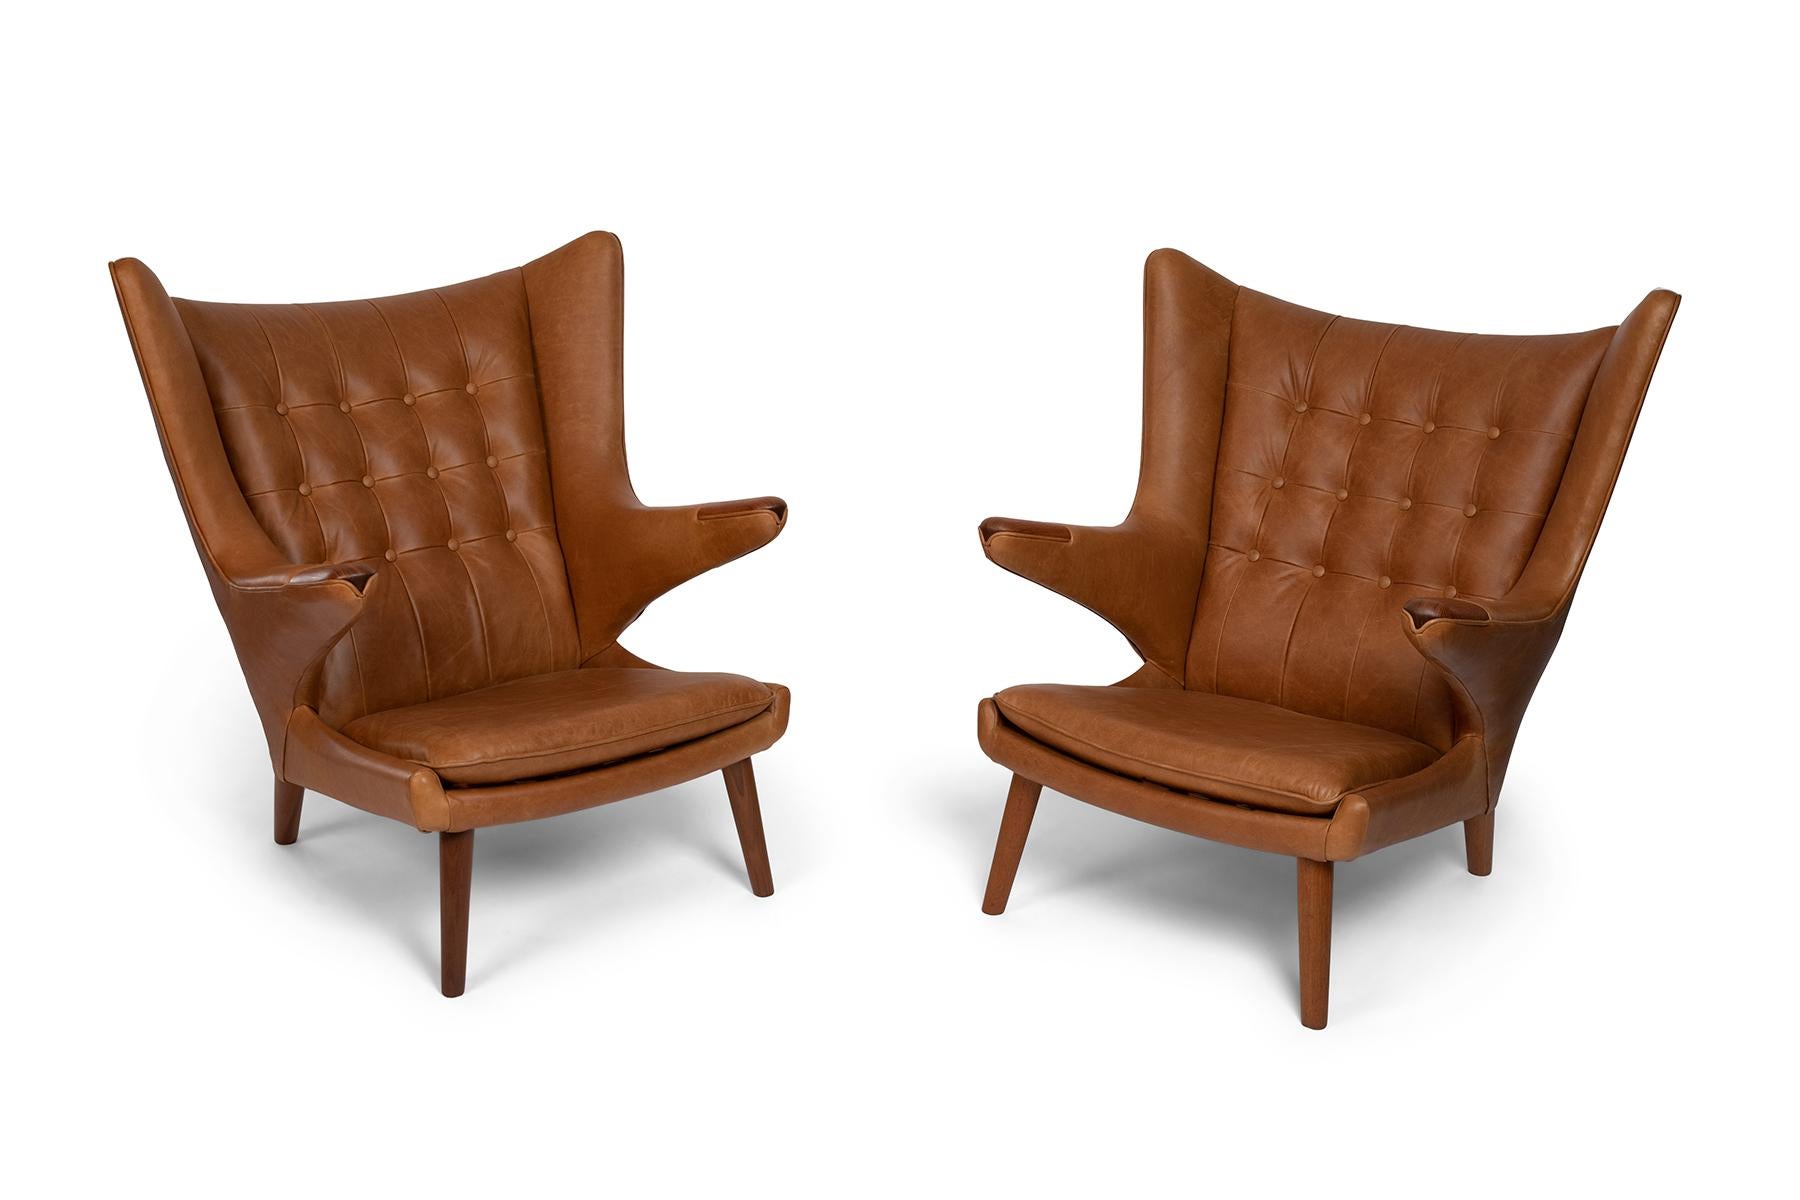 Pair of Hans Wegner A.P. stolen papa bear chairs and ottoman from 1951. These sculptural examples have solid teak paws, legs and ottoman sides. This set has been newly and masterfully upholstered in a stunning caramel leather. Price listed is for